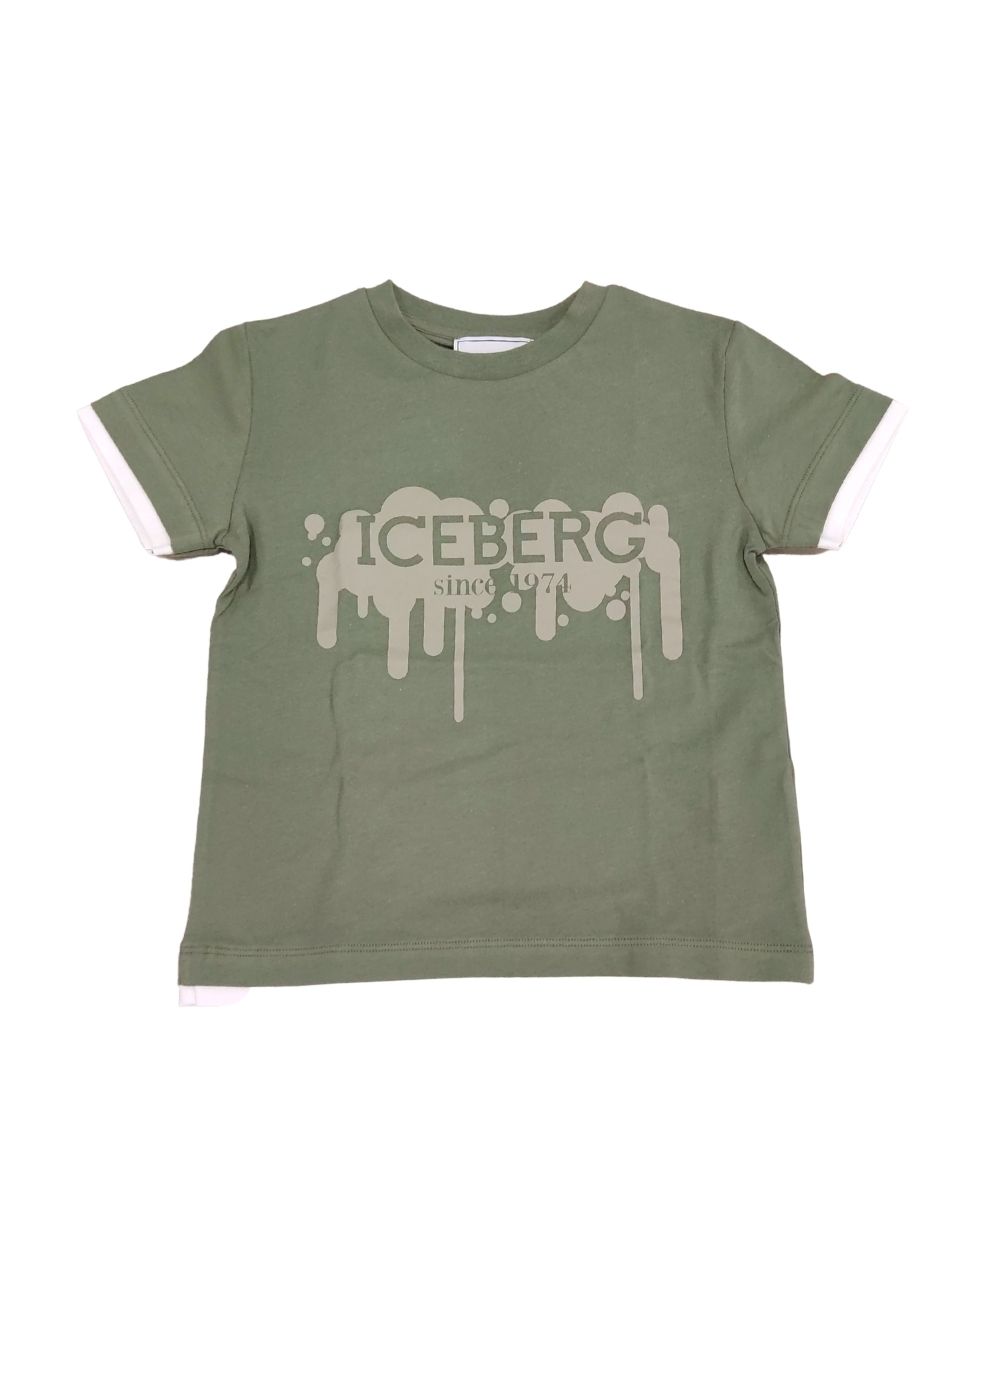 Featured image for “Iceberg T-shirt verde con logo”